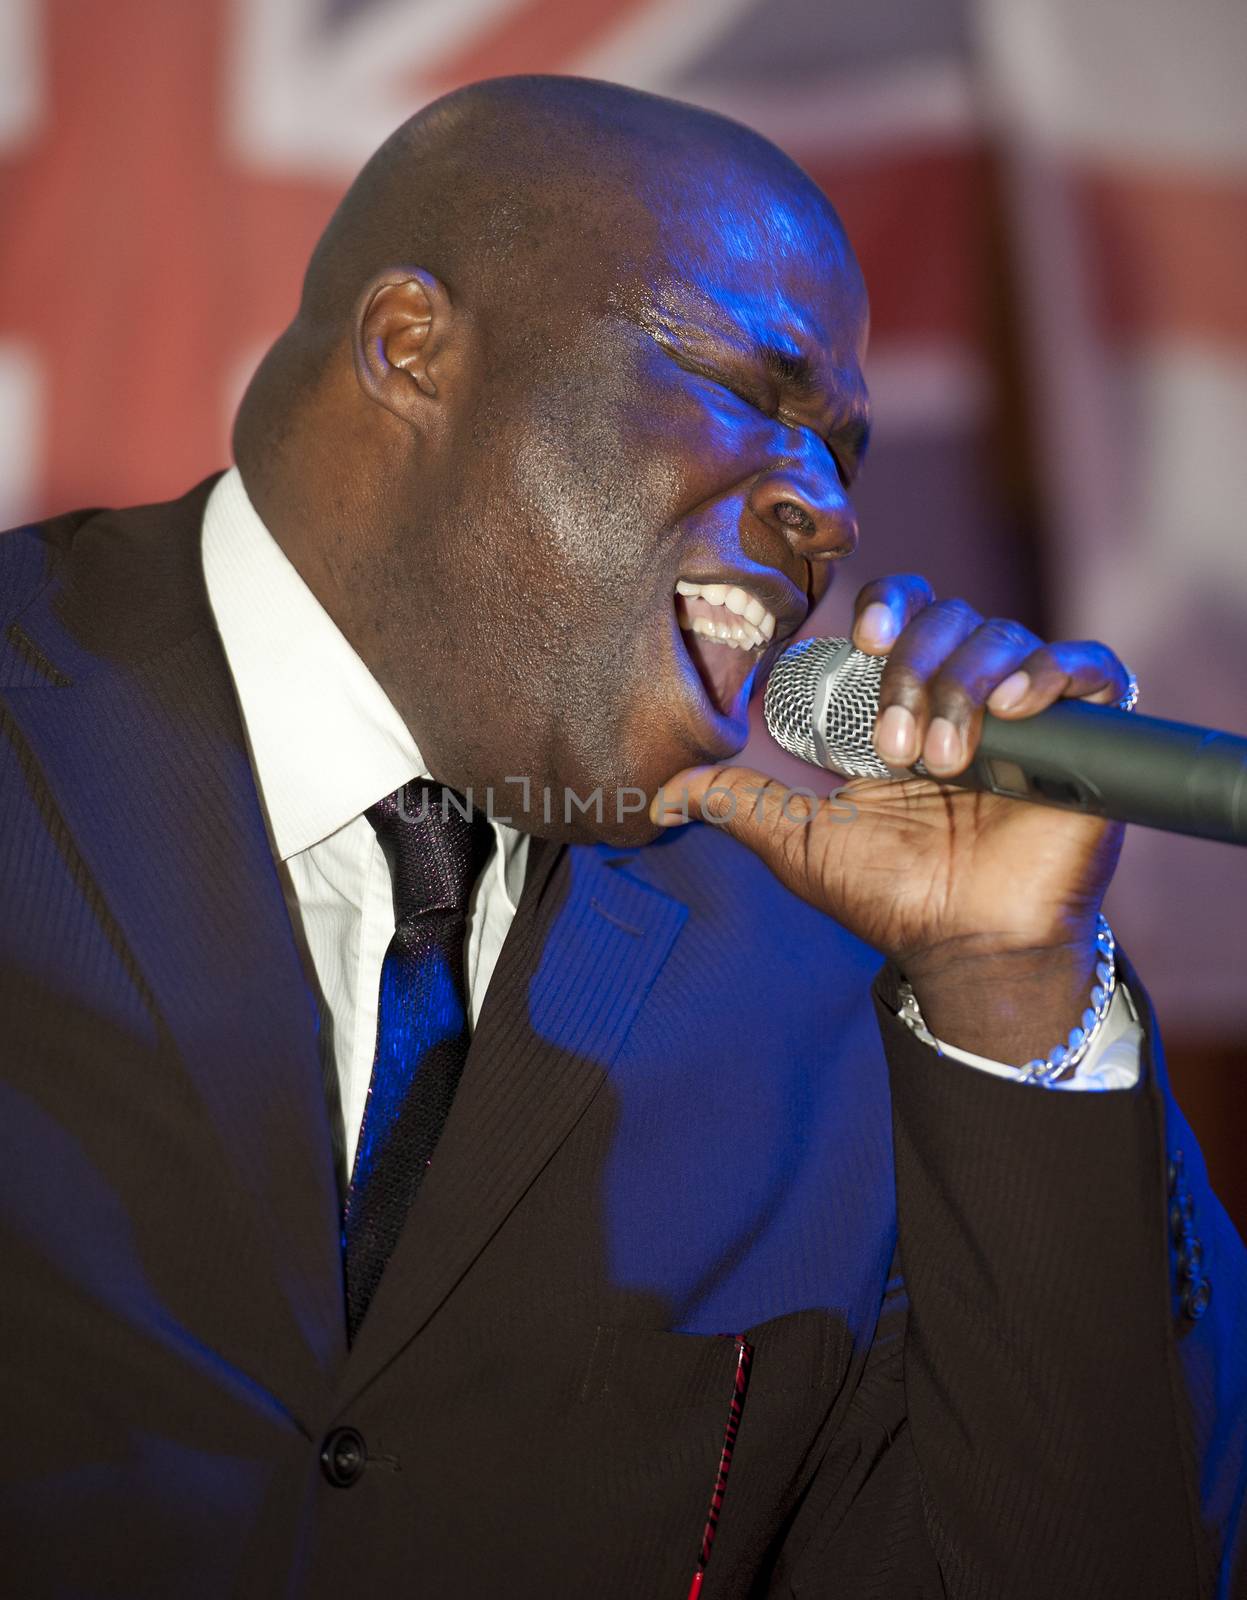 African male giving a live soul singing performance